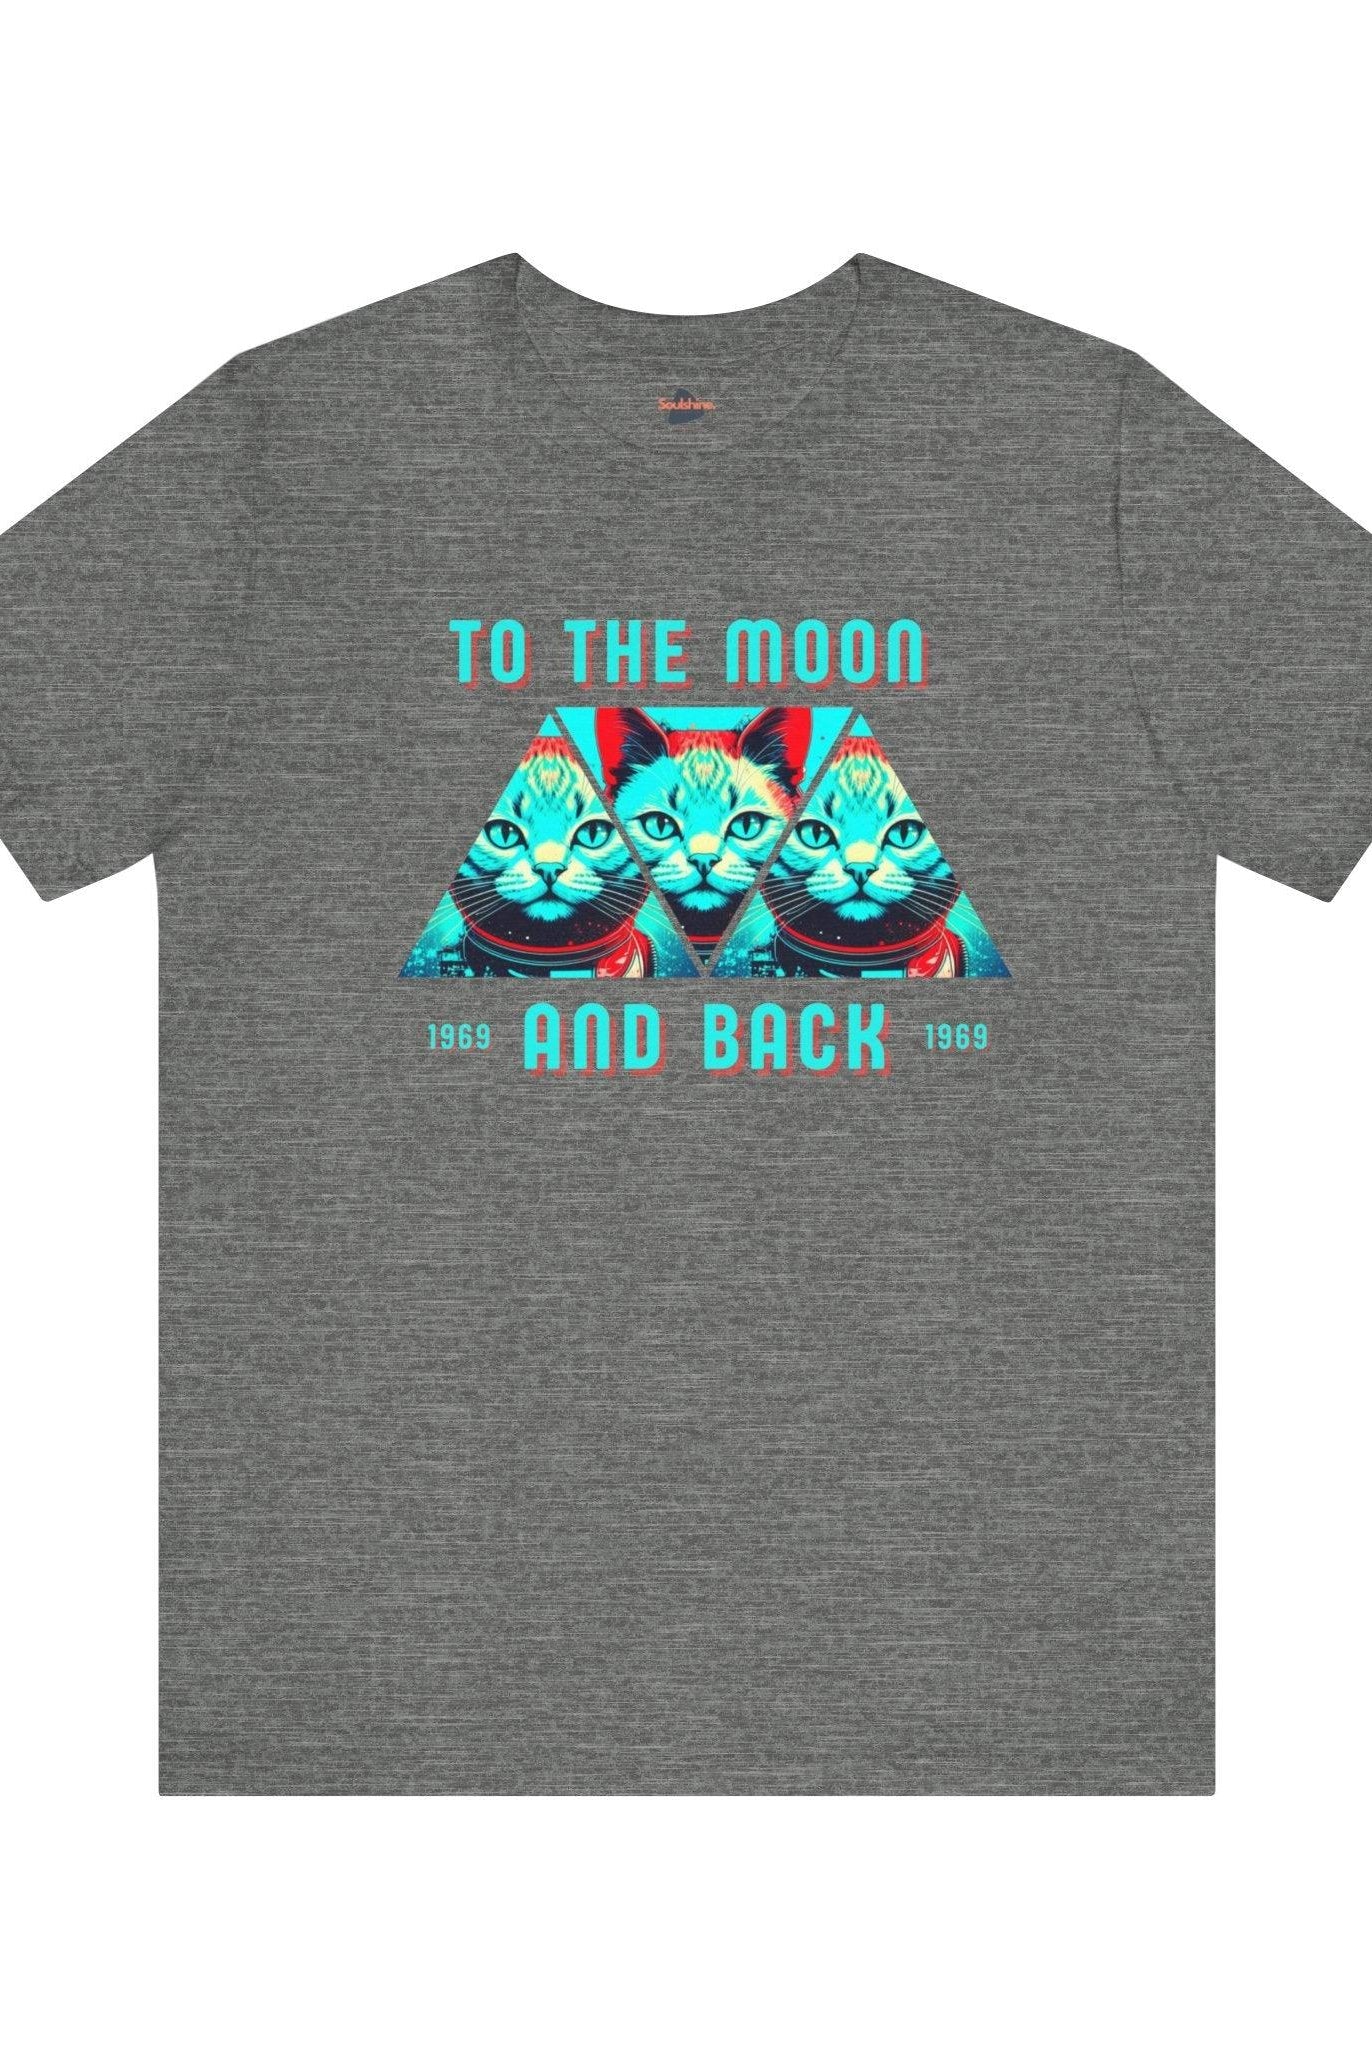 To the moon and back - Soulshinecreators - Unisex Jersey Short Sleeve Tee - US T-Shirt by Soulshinecreators | Soulshinecreators